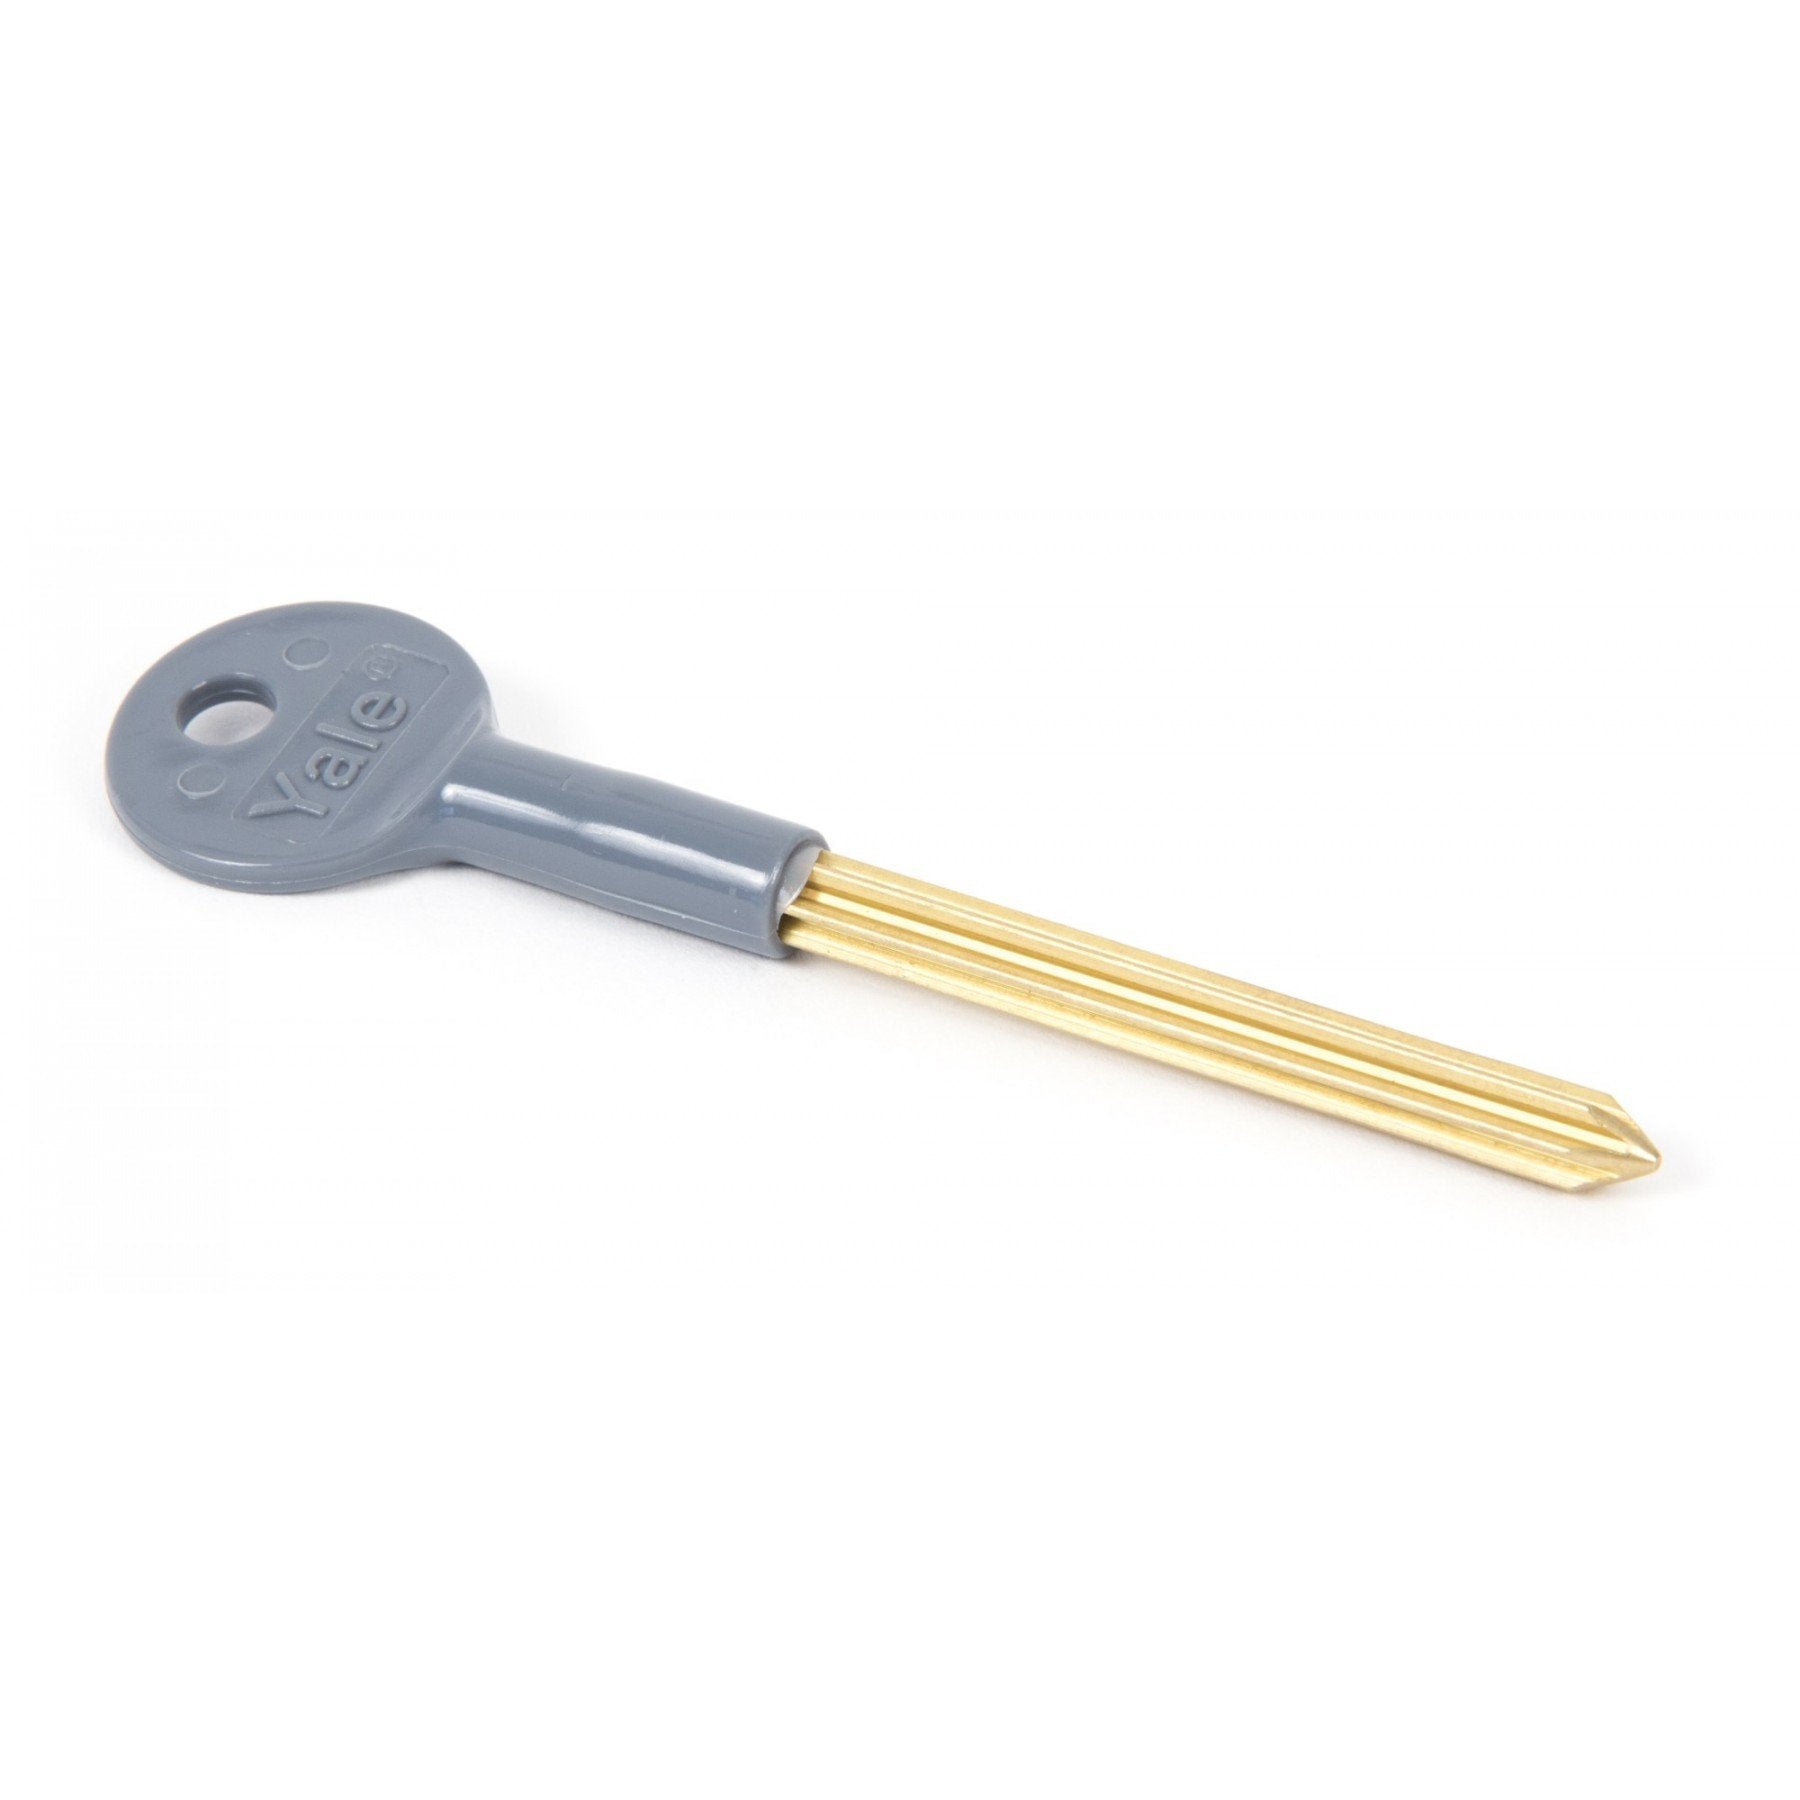 From the Anvil Chubb Long Security Star Key - No.42 Interiors